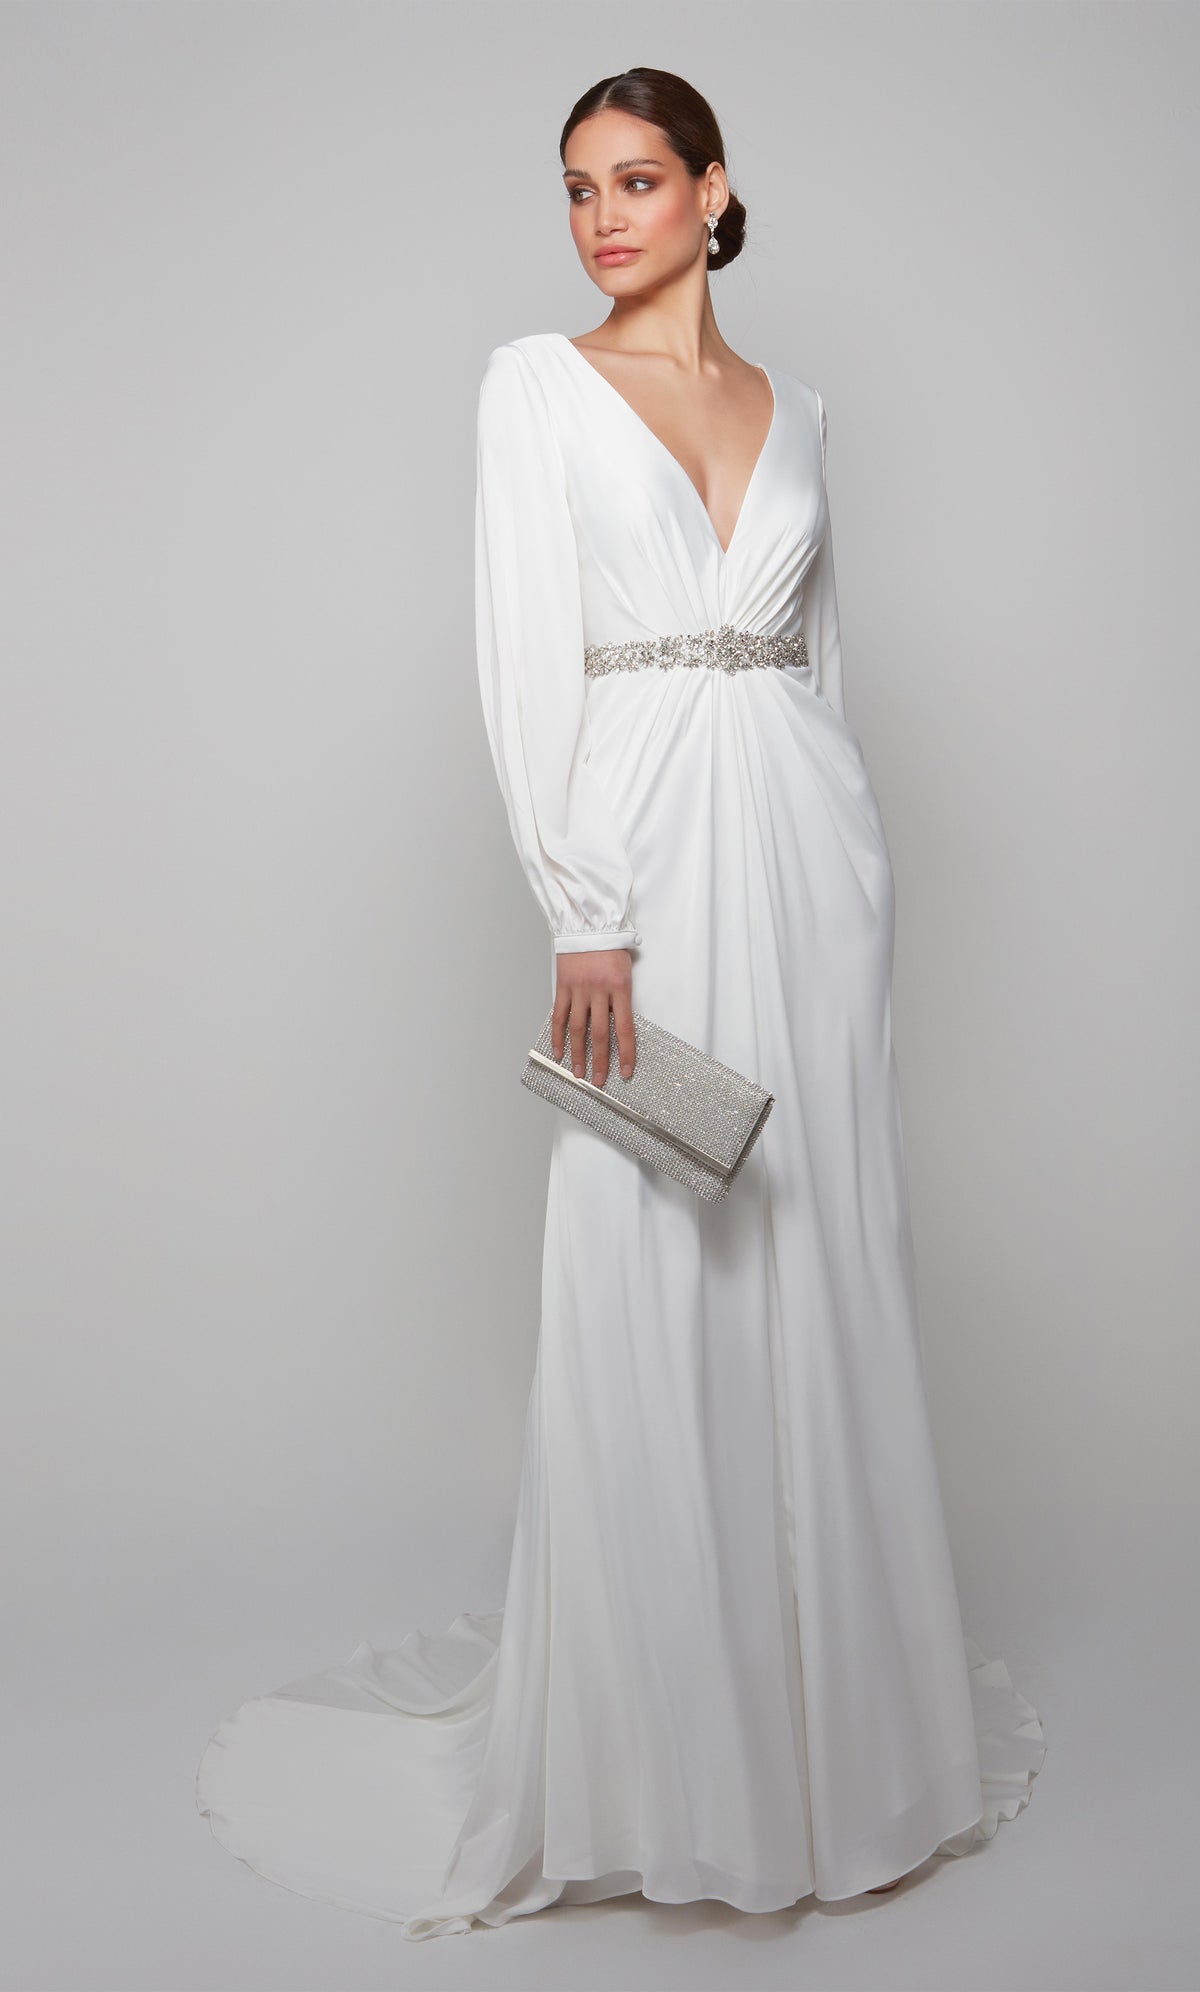 Long sleeve chic wedding dress with a plunging neckline and faux belt at the natural waistline in diamond white.